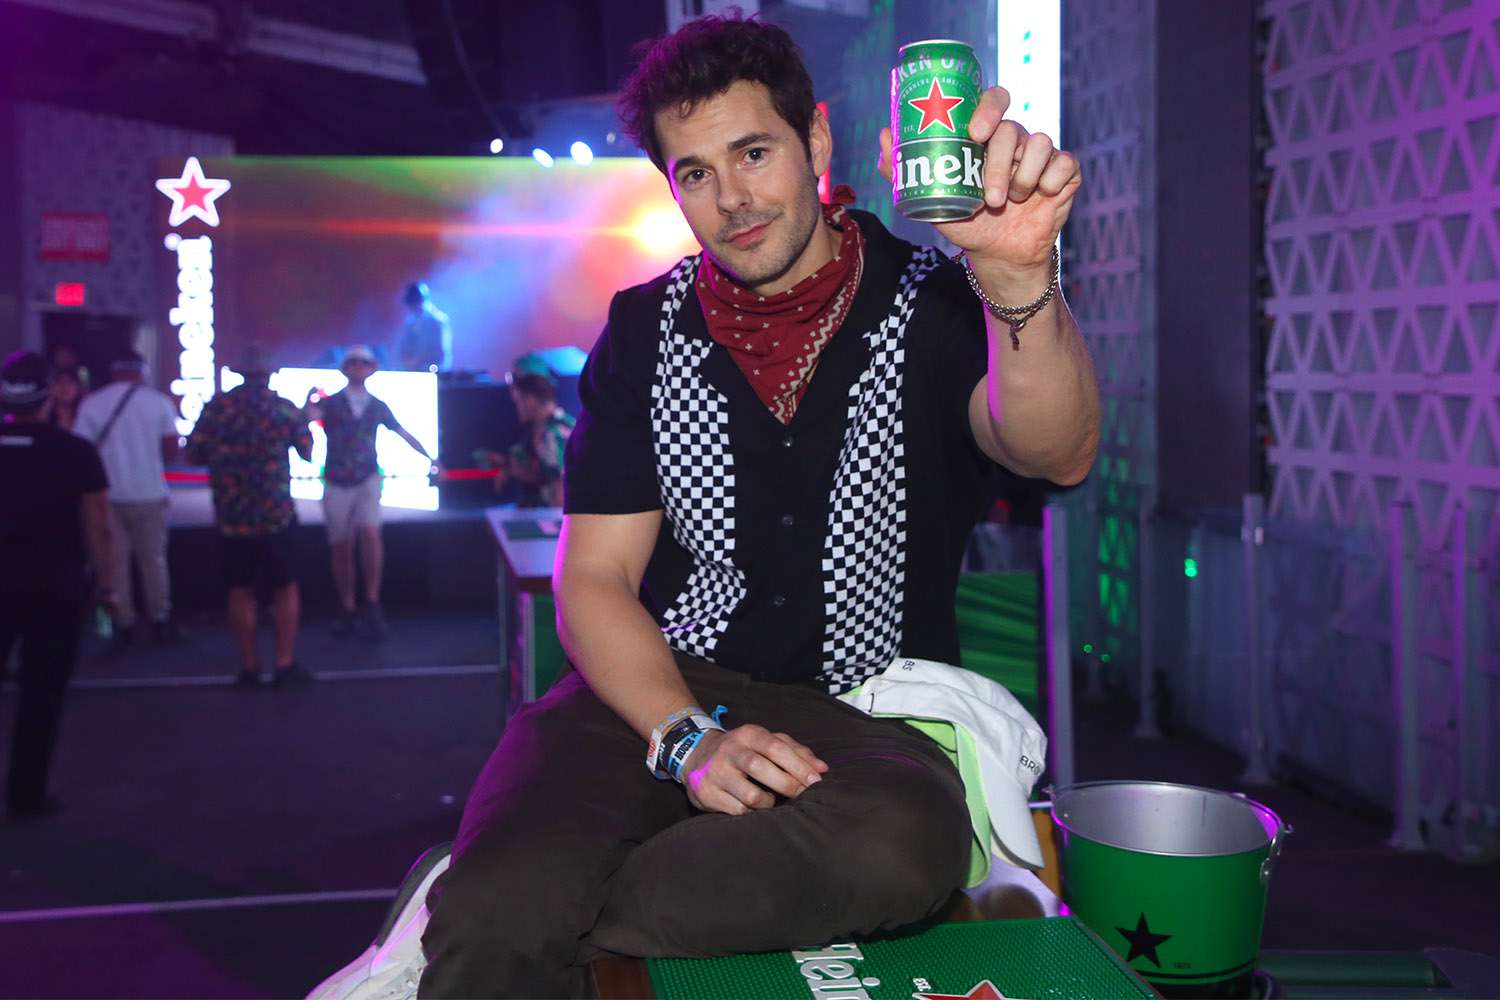 INDIO, CALIFORNIA - APRIL 22: Jayson Blair enjoys a Heineken at the Heineken House at the 2022 Coachella Valley Music and Arts Festival on Friday, April 22nd in Indio, California. (Photo by Phillip Faraone/Getty Images for Heineken)